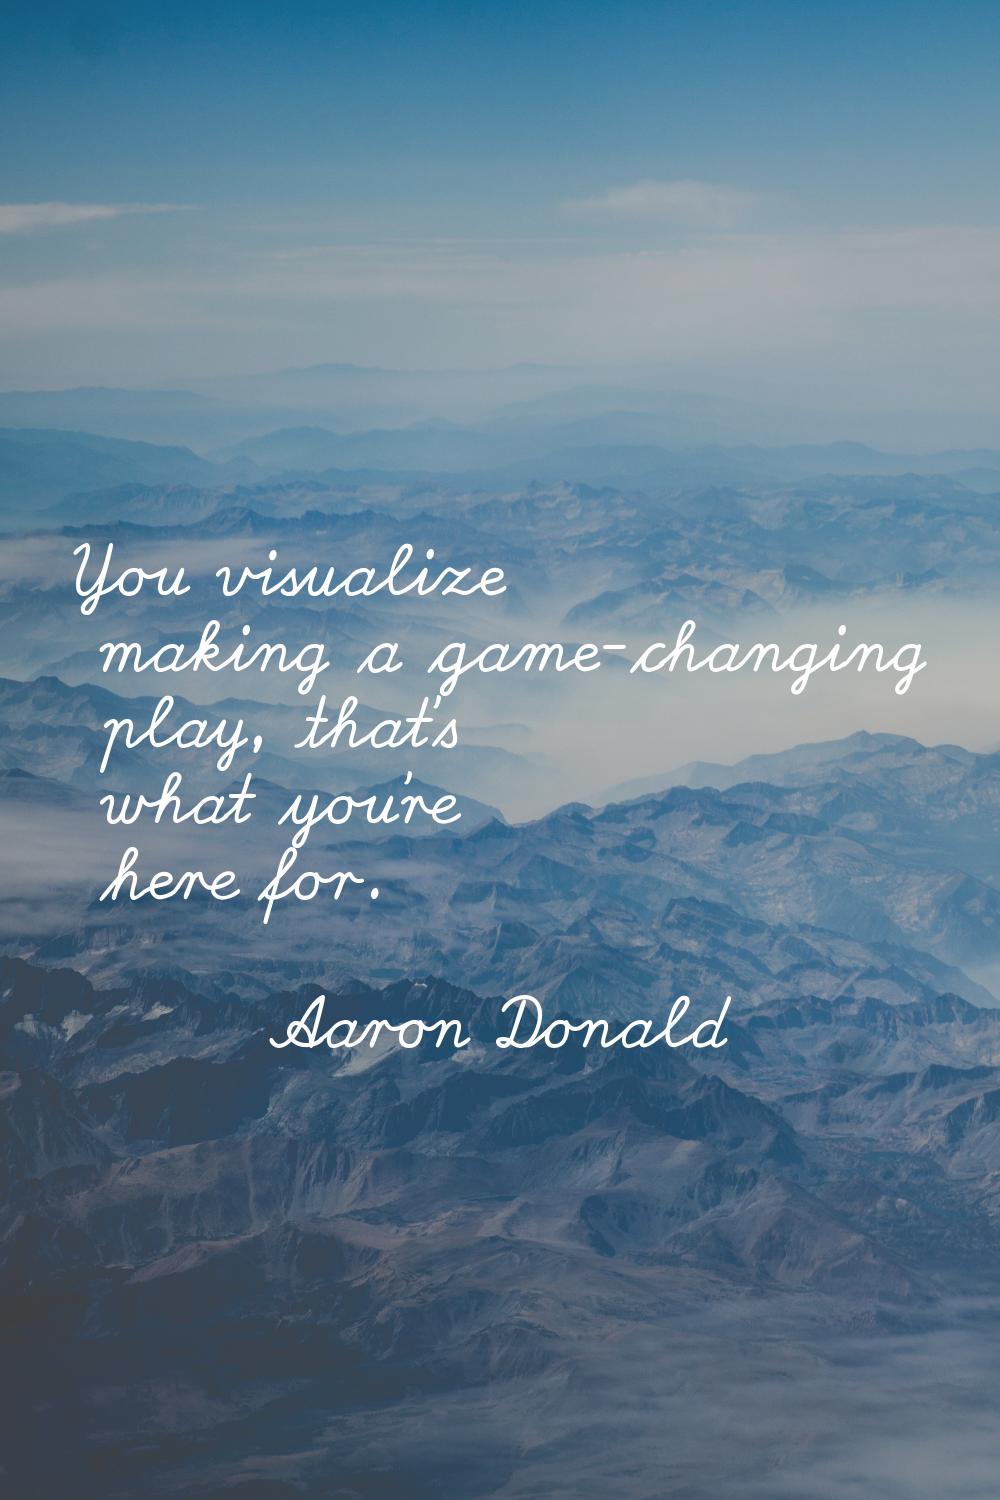 You visualize making a game-changing play, that's what you're here for.